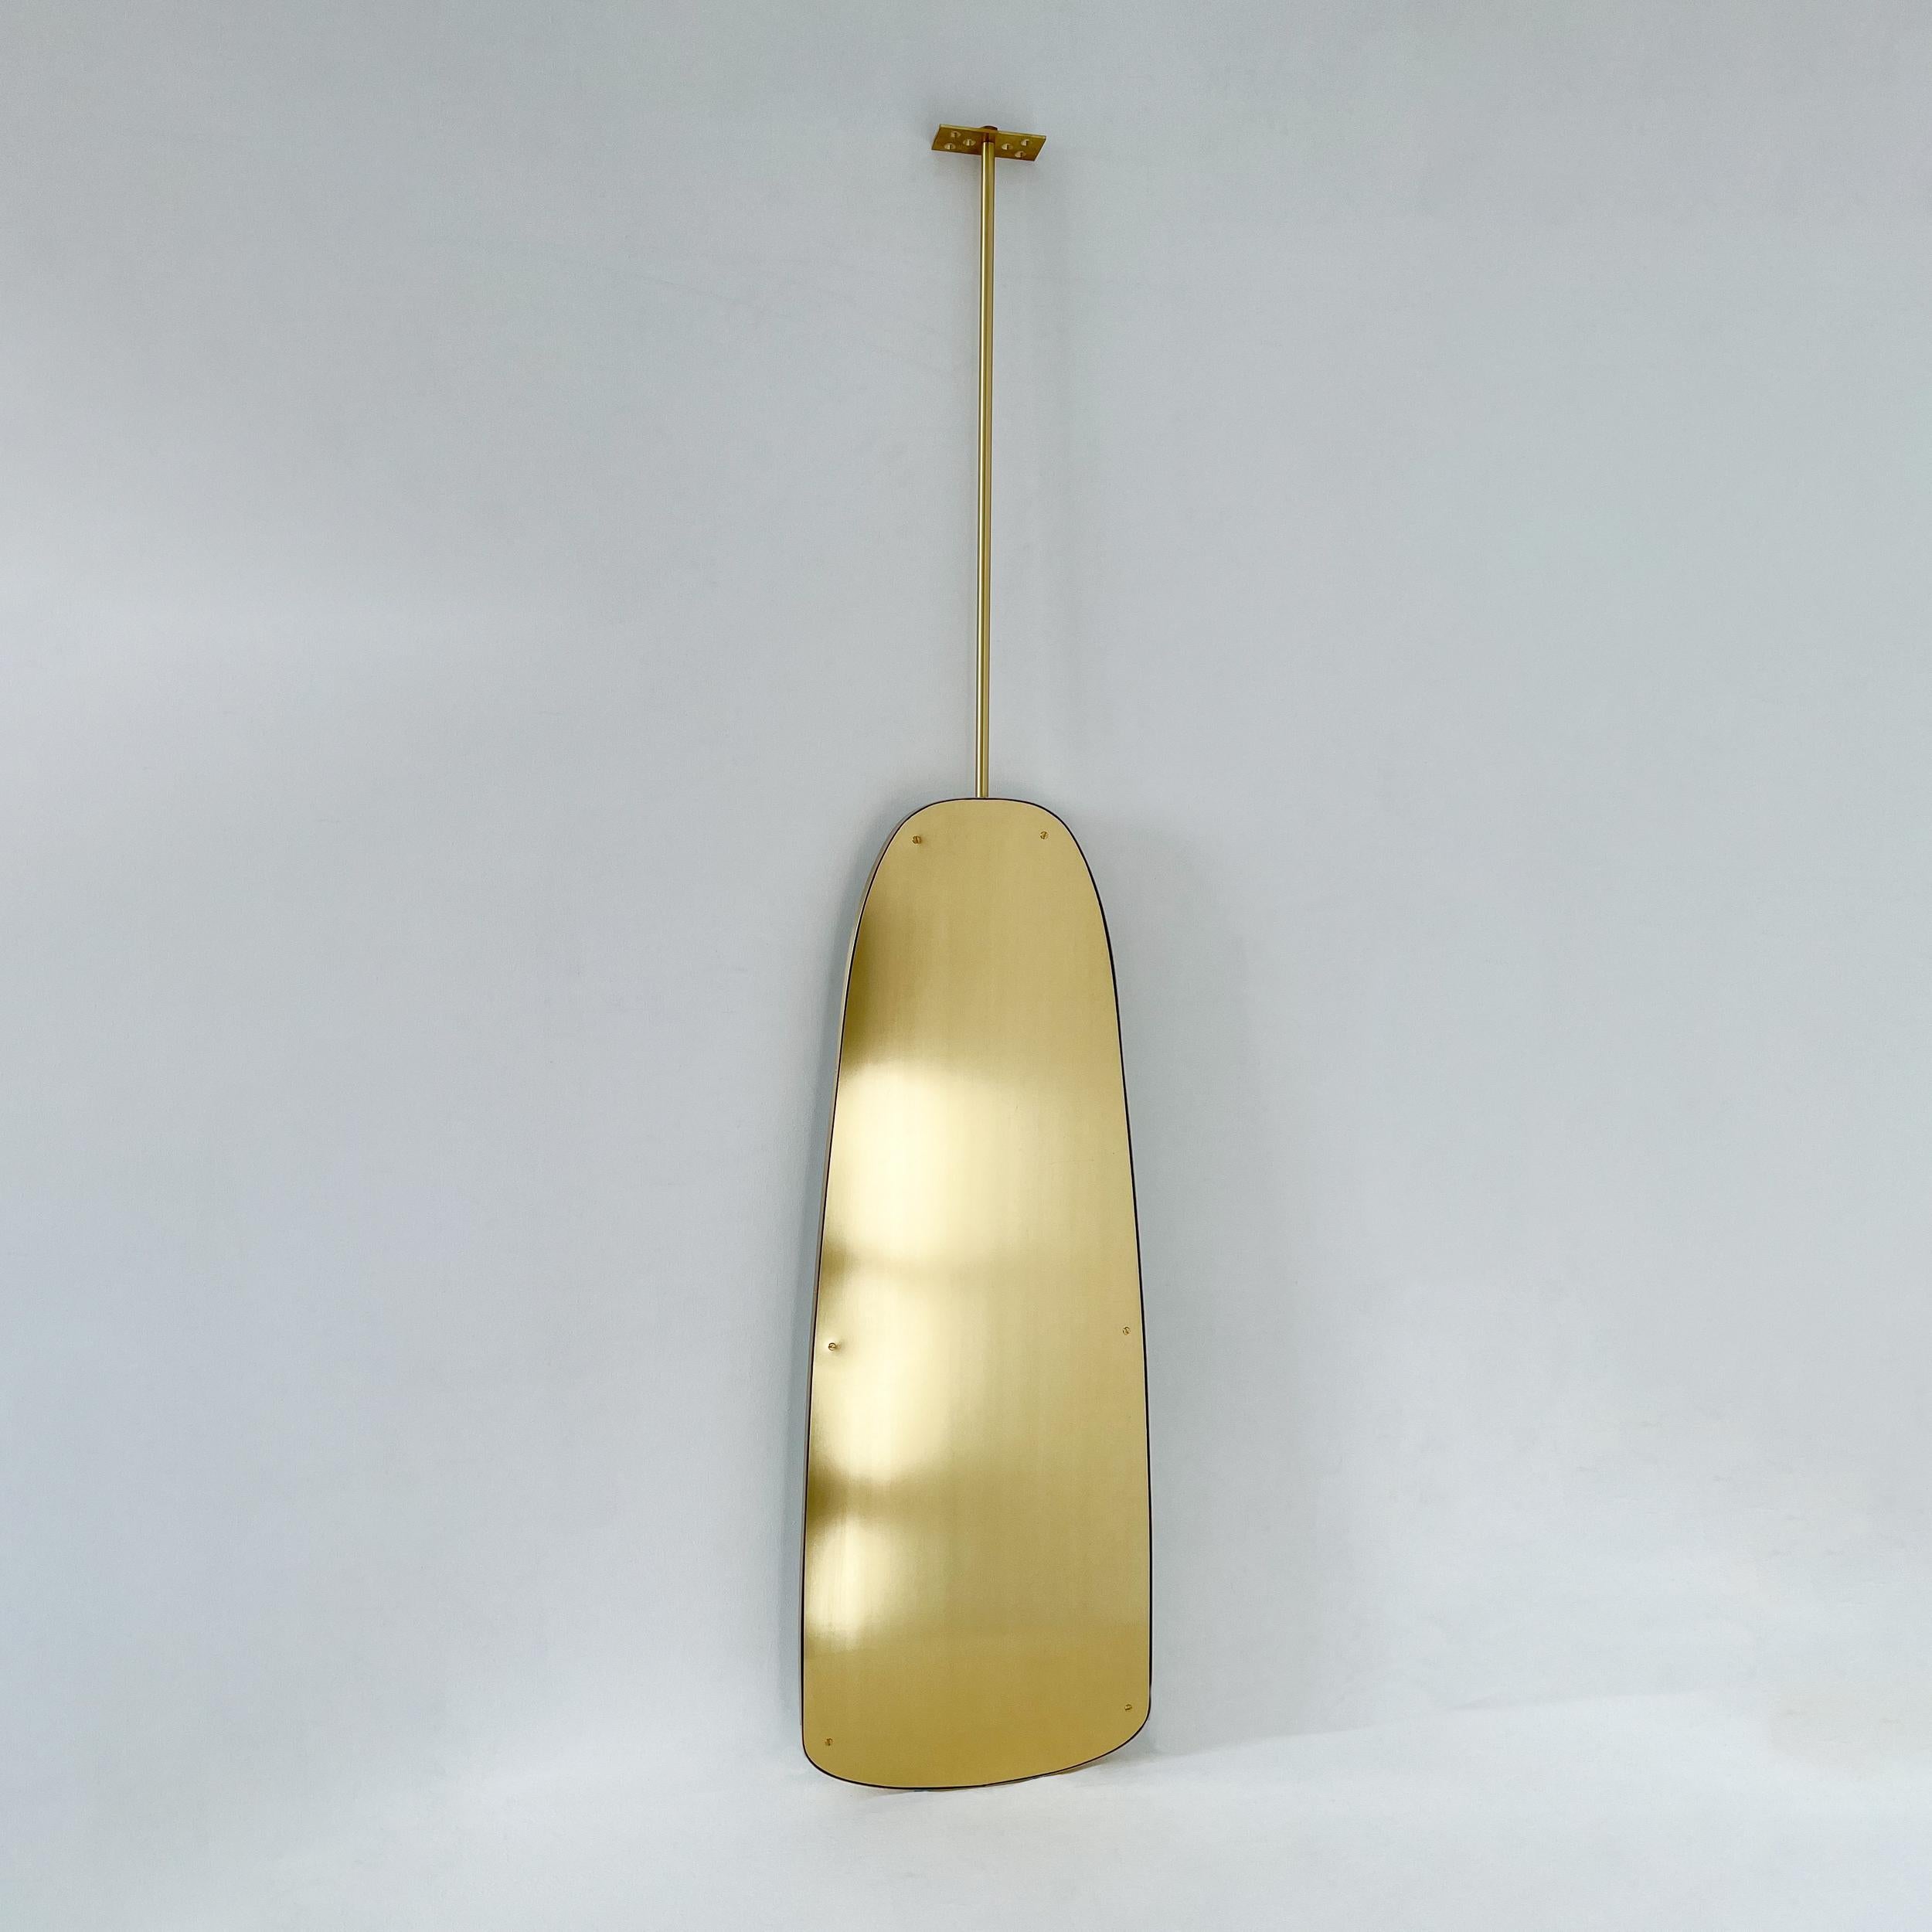 Art Deco Ceiling Suspended Organic Shaped Mirror with Brass Frame For Sale 4